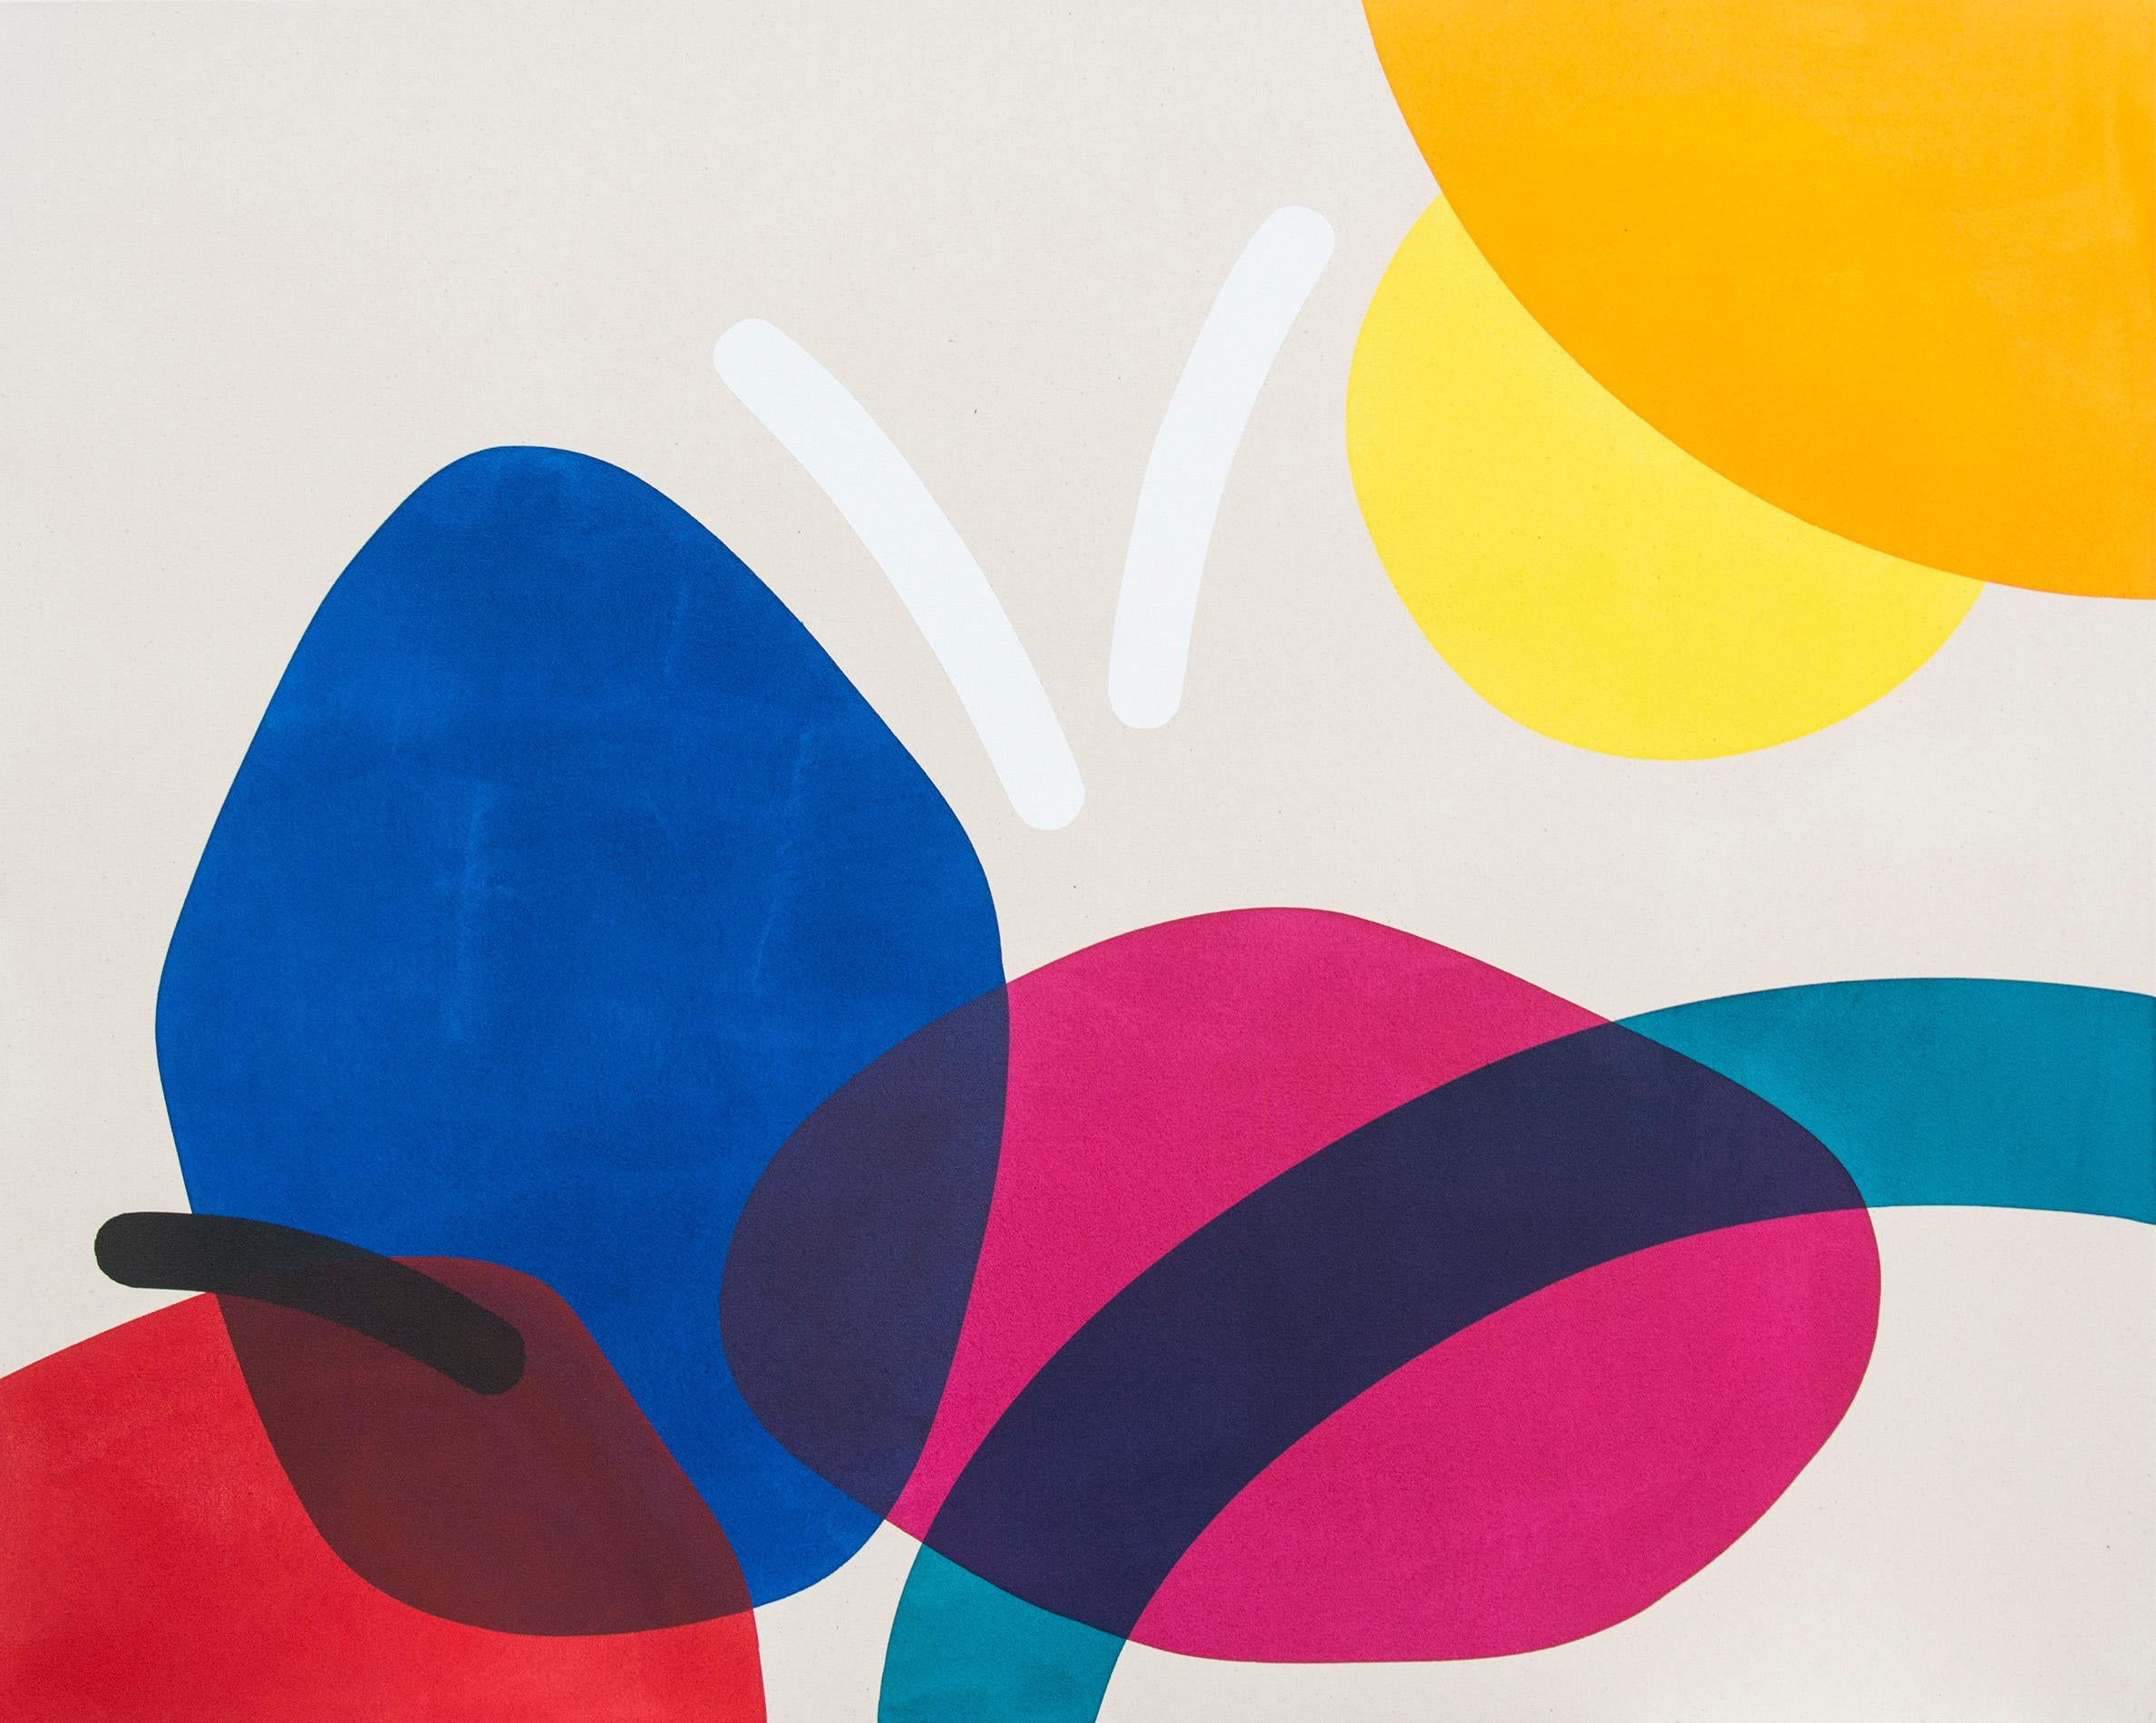 Aron Hill Abstract Painting - 2 Yellow Suns with Red and Blue - Circular, oblong, and arched forms